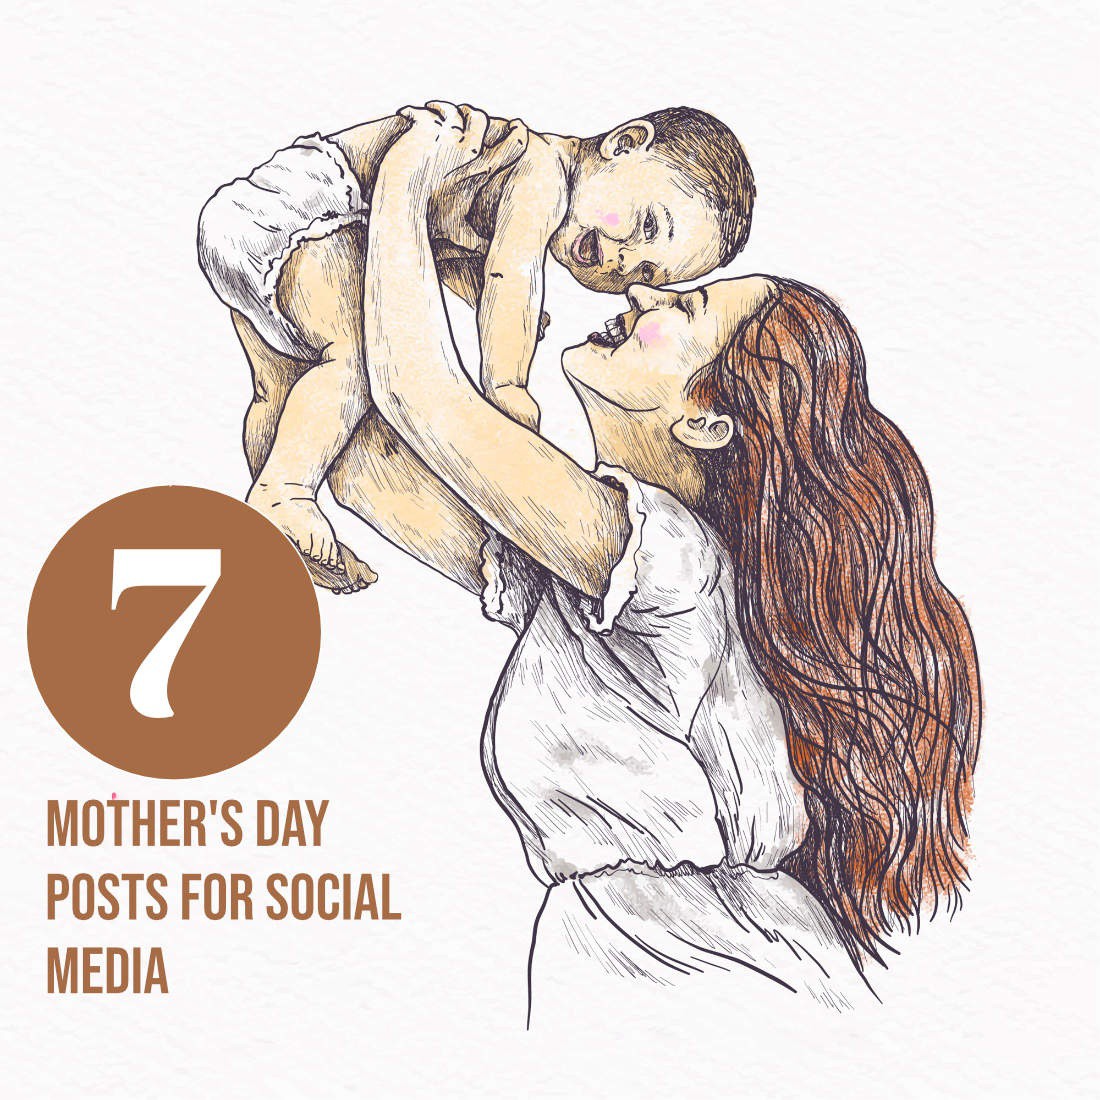 Social Media Posts for Mother's Day Image 8